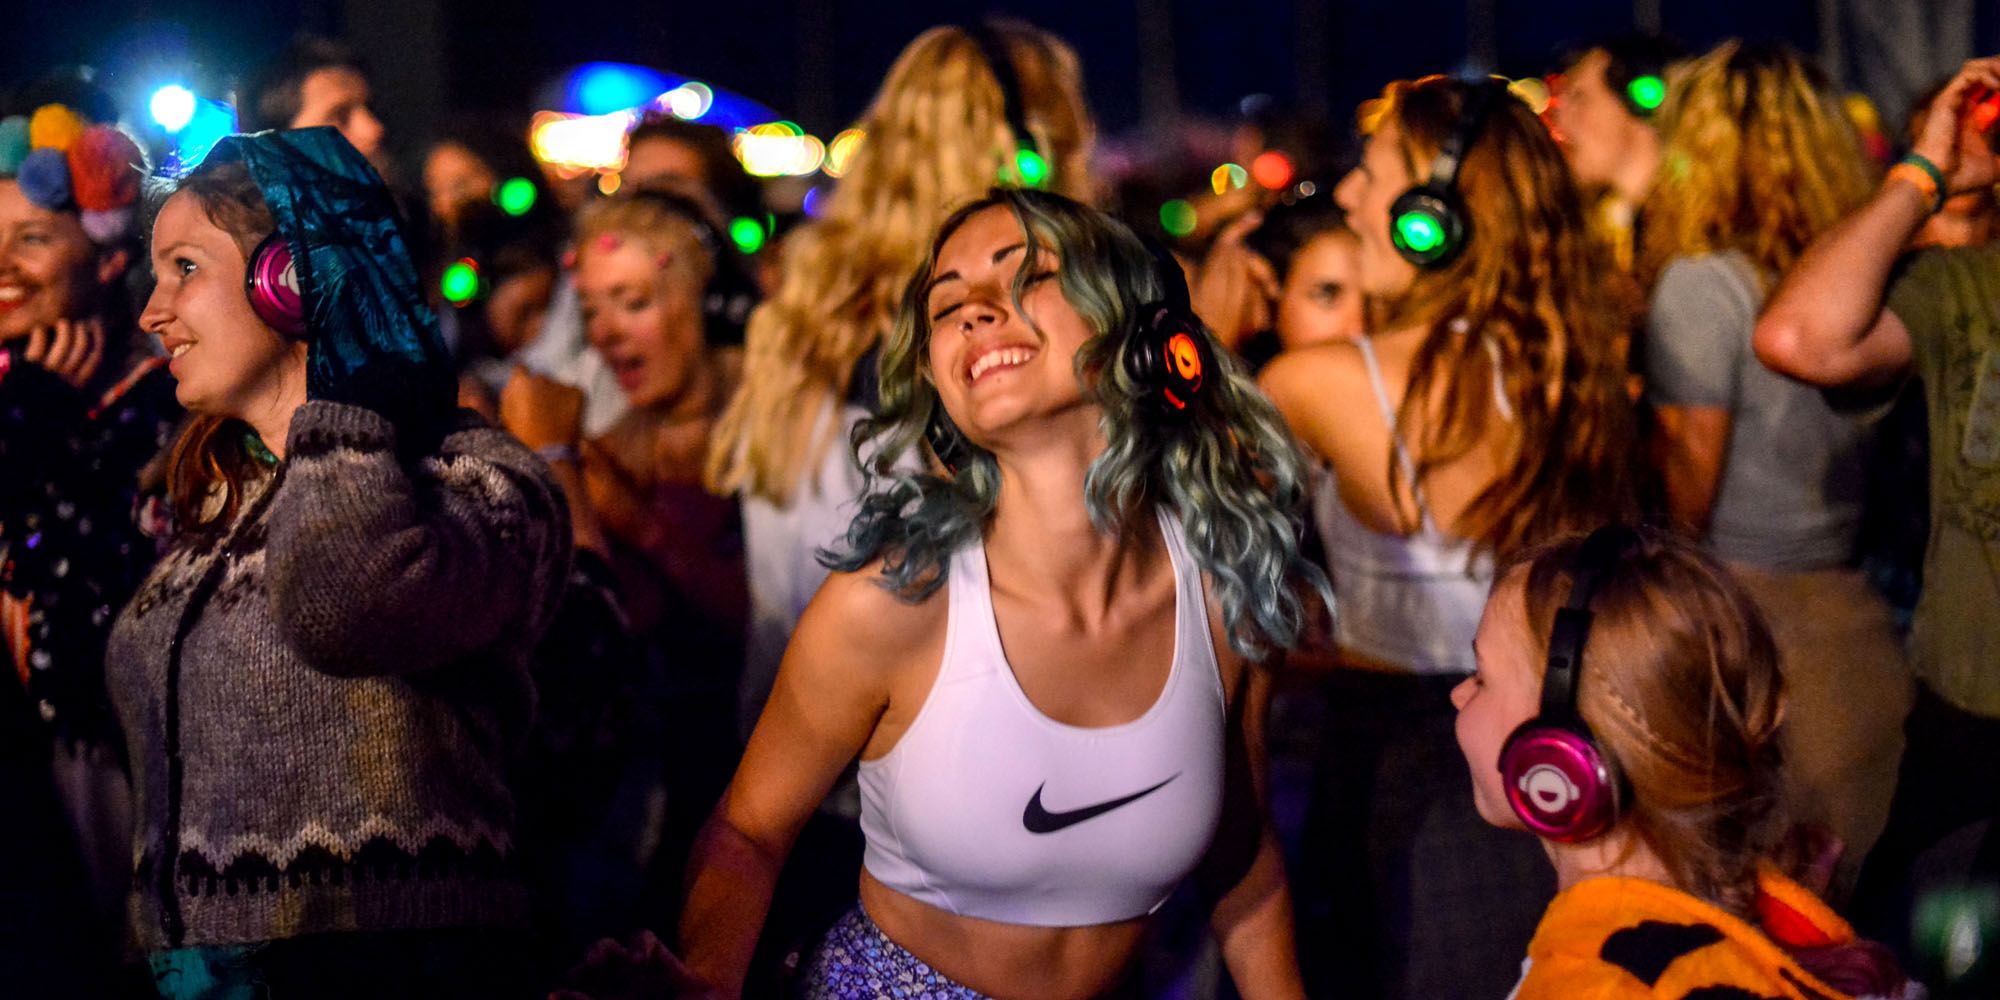 Sweden Announces First Women Only Music Festival - No Men Allowed to Concert